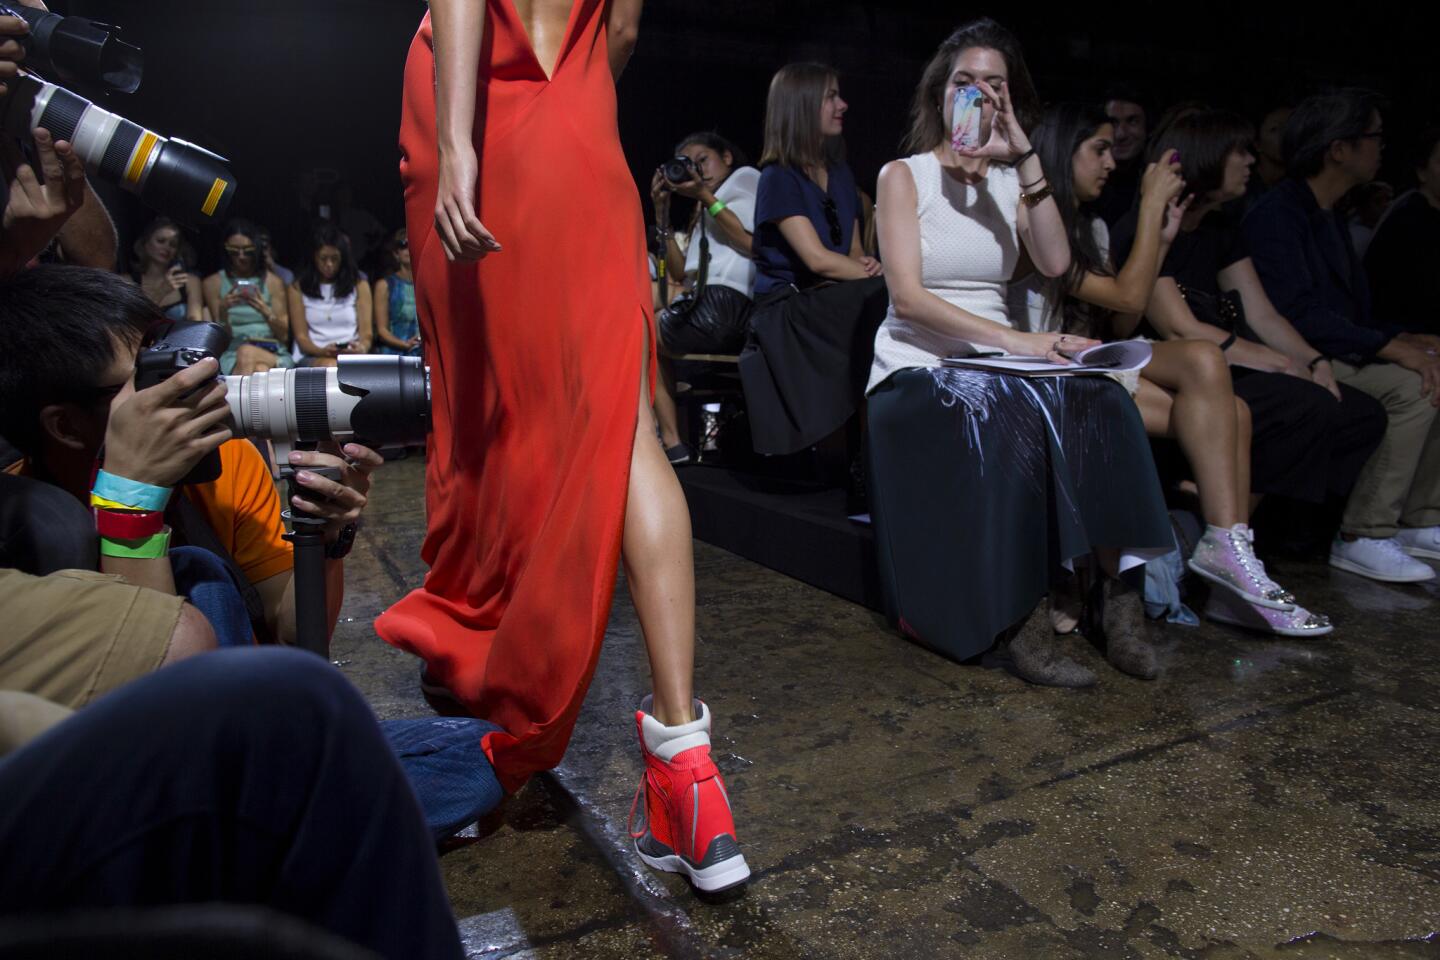 DKNY Spring 2014 Ready-to-Wear Collection